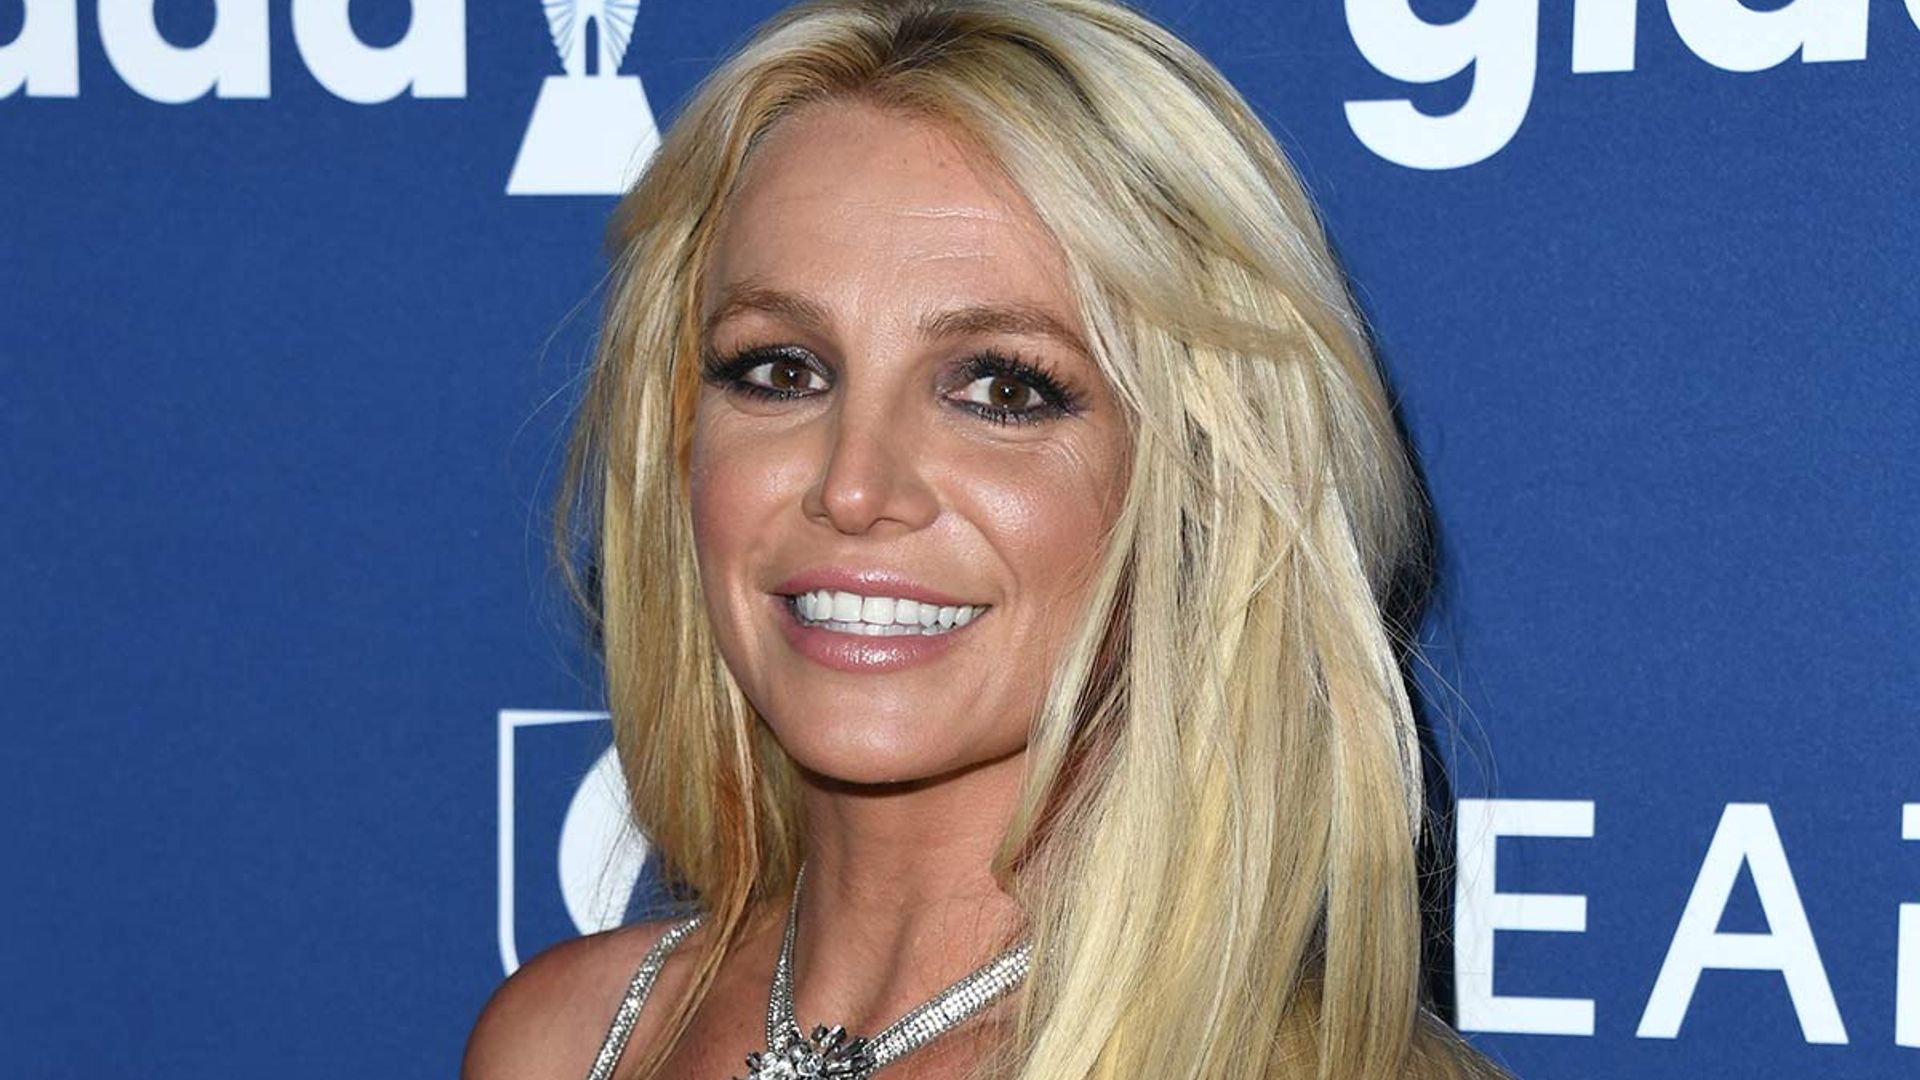 Britney Spears wows in neon swimsuit and pink hair transformation